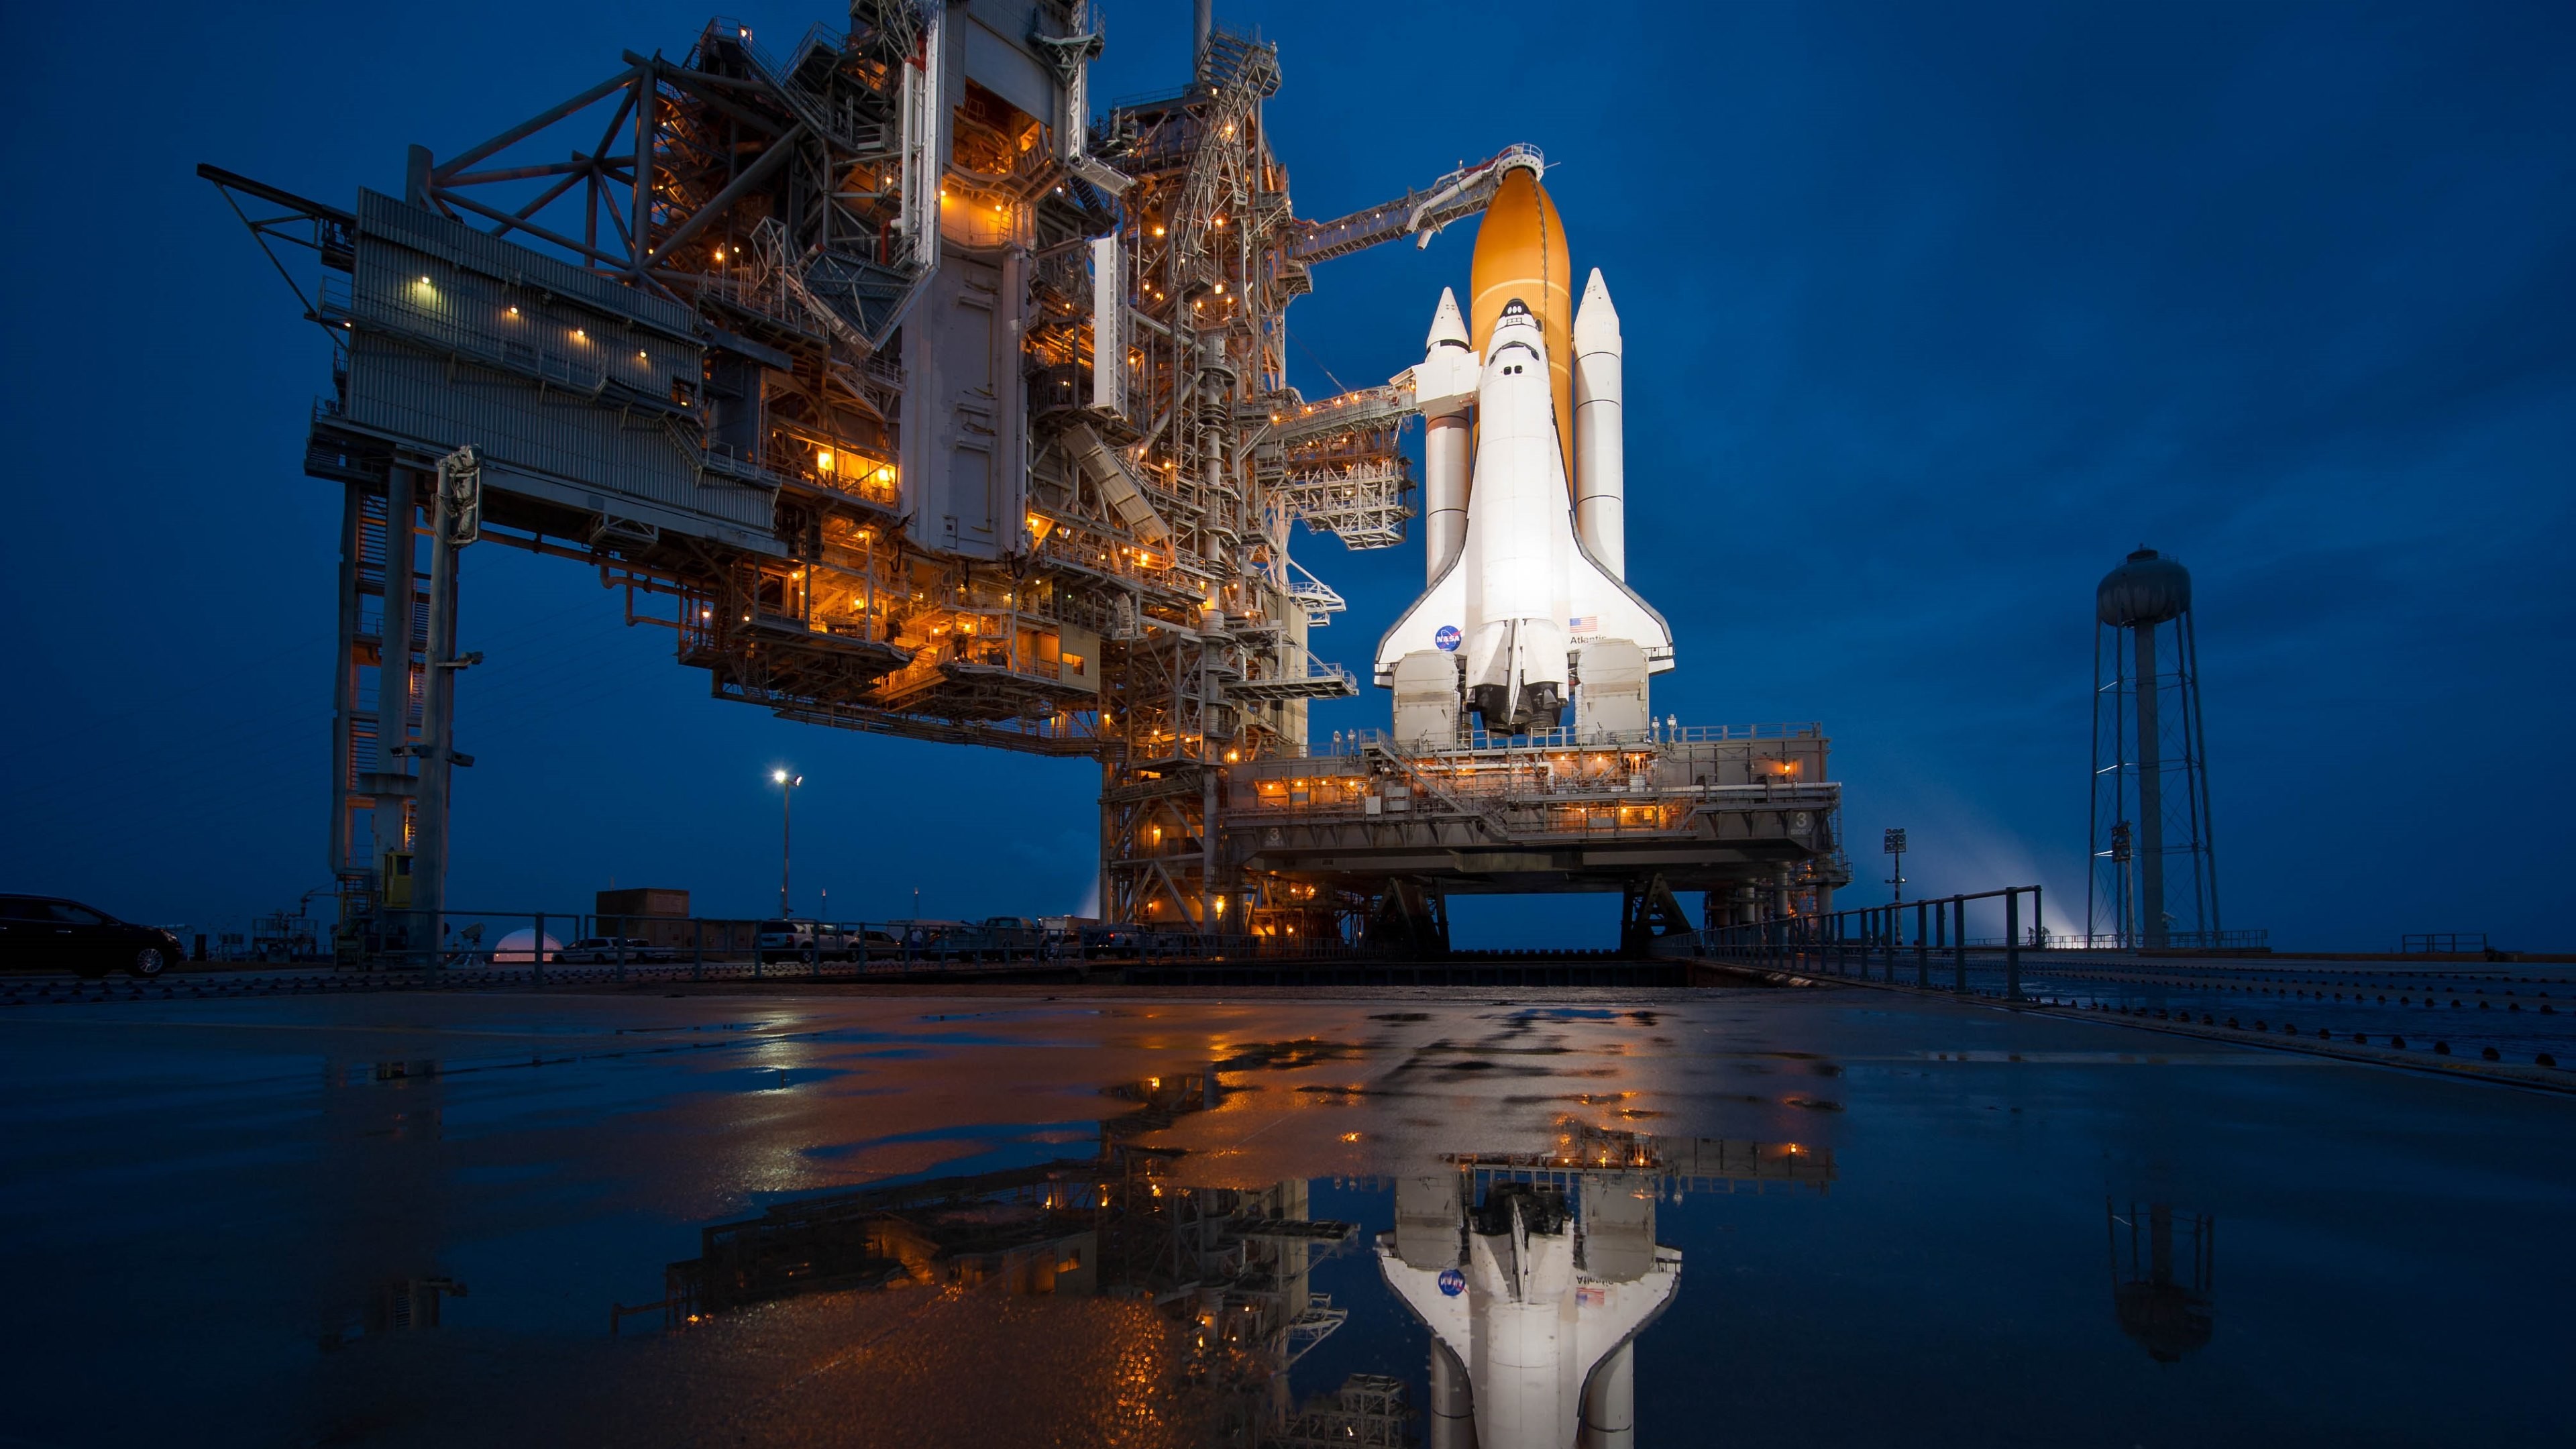 3840x2160  The 2nd HD wallpaper with the NASA Atlantis shuttle on the launch  platform